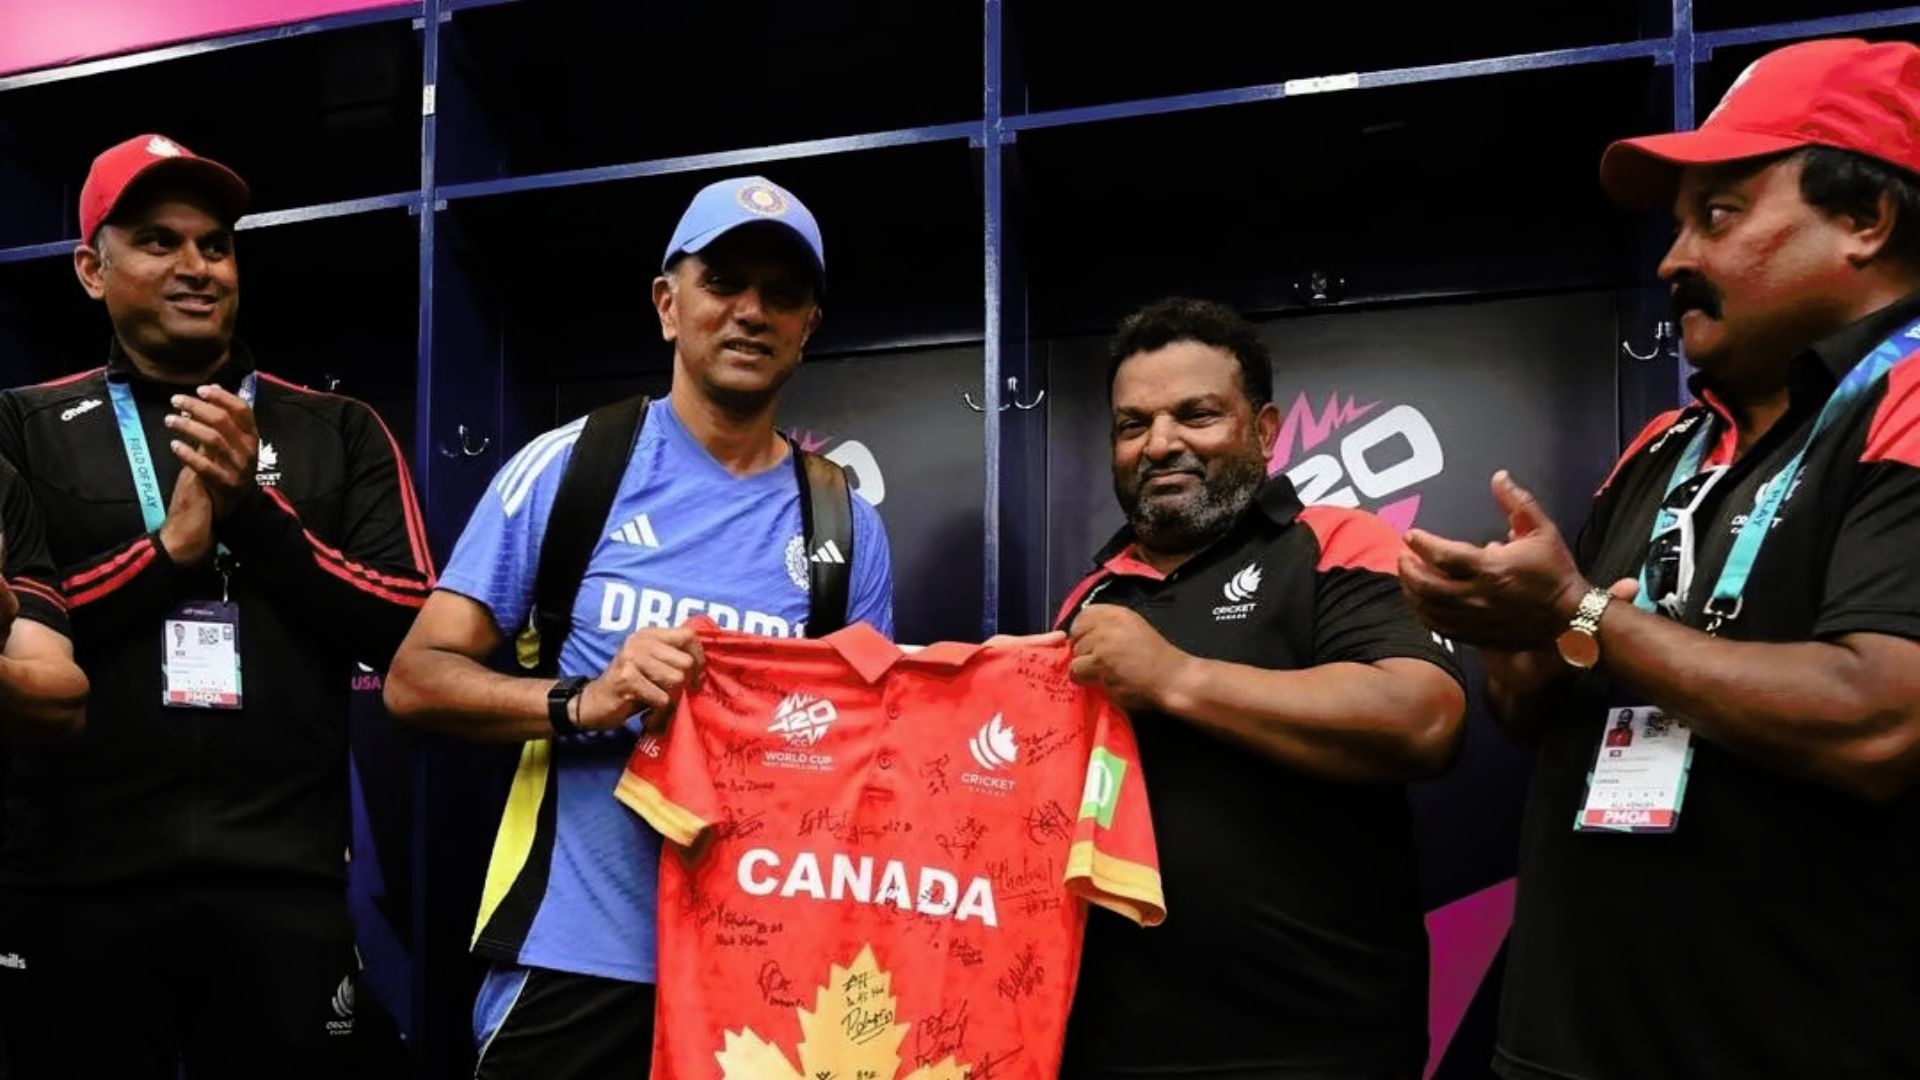 T20 World Cup: Rahul Dravid’s Heartwarming Gesture To Canada Cricket Team Goes Viral